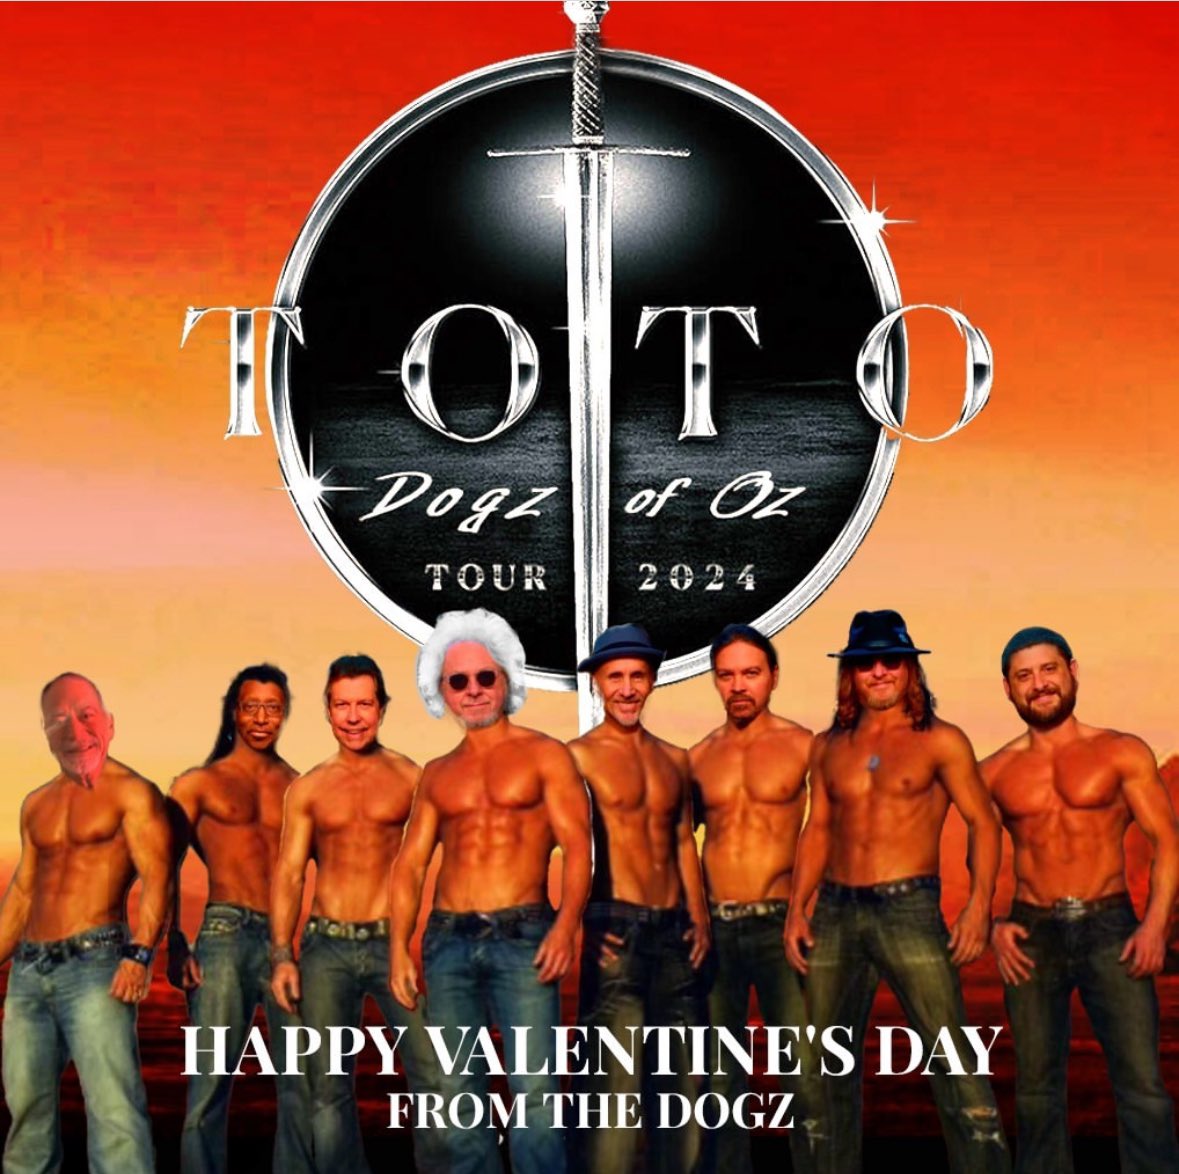 Hey guys! Happy Valentine’s Day!  Don’t miss #Toto Feb.20,2024 at the #countbasiecenter in Red Bank NJ 
@totothemselves @YachtRockShow